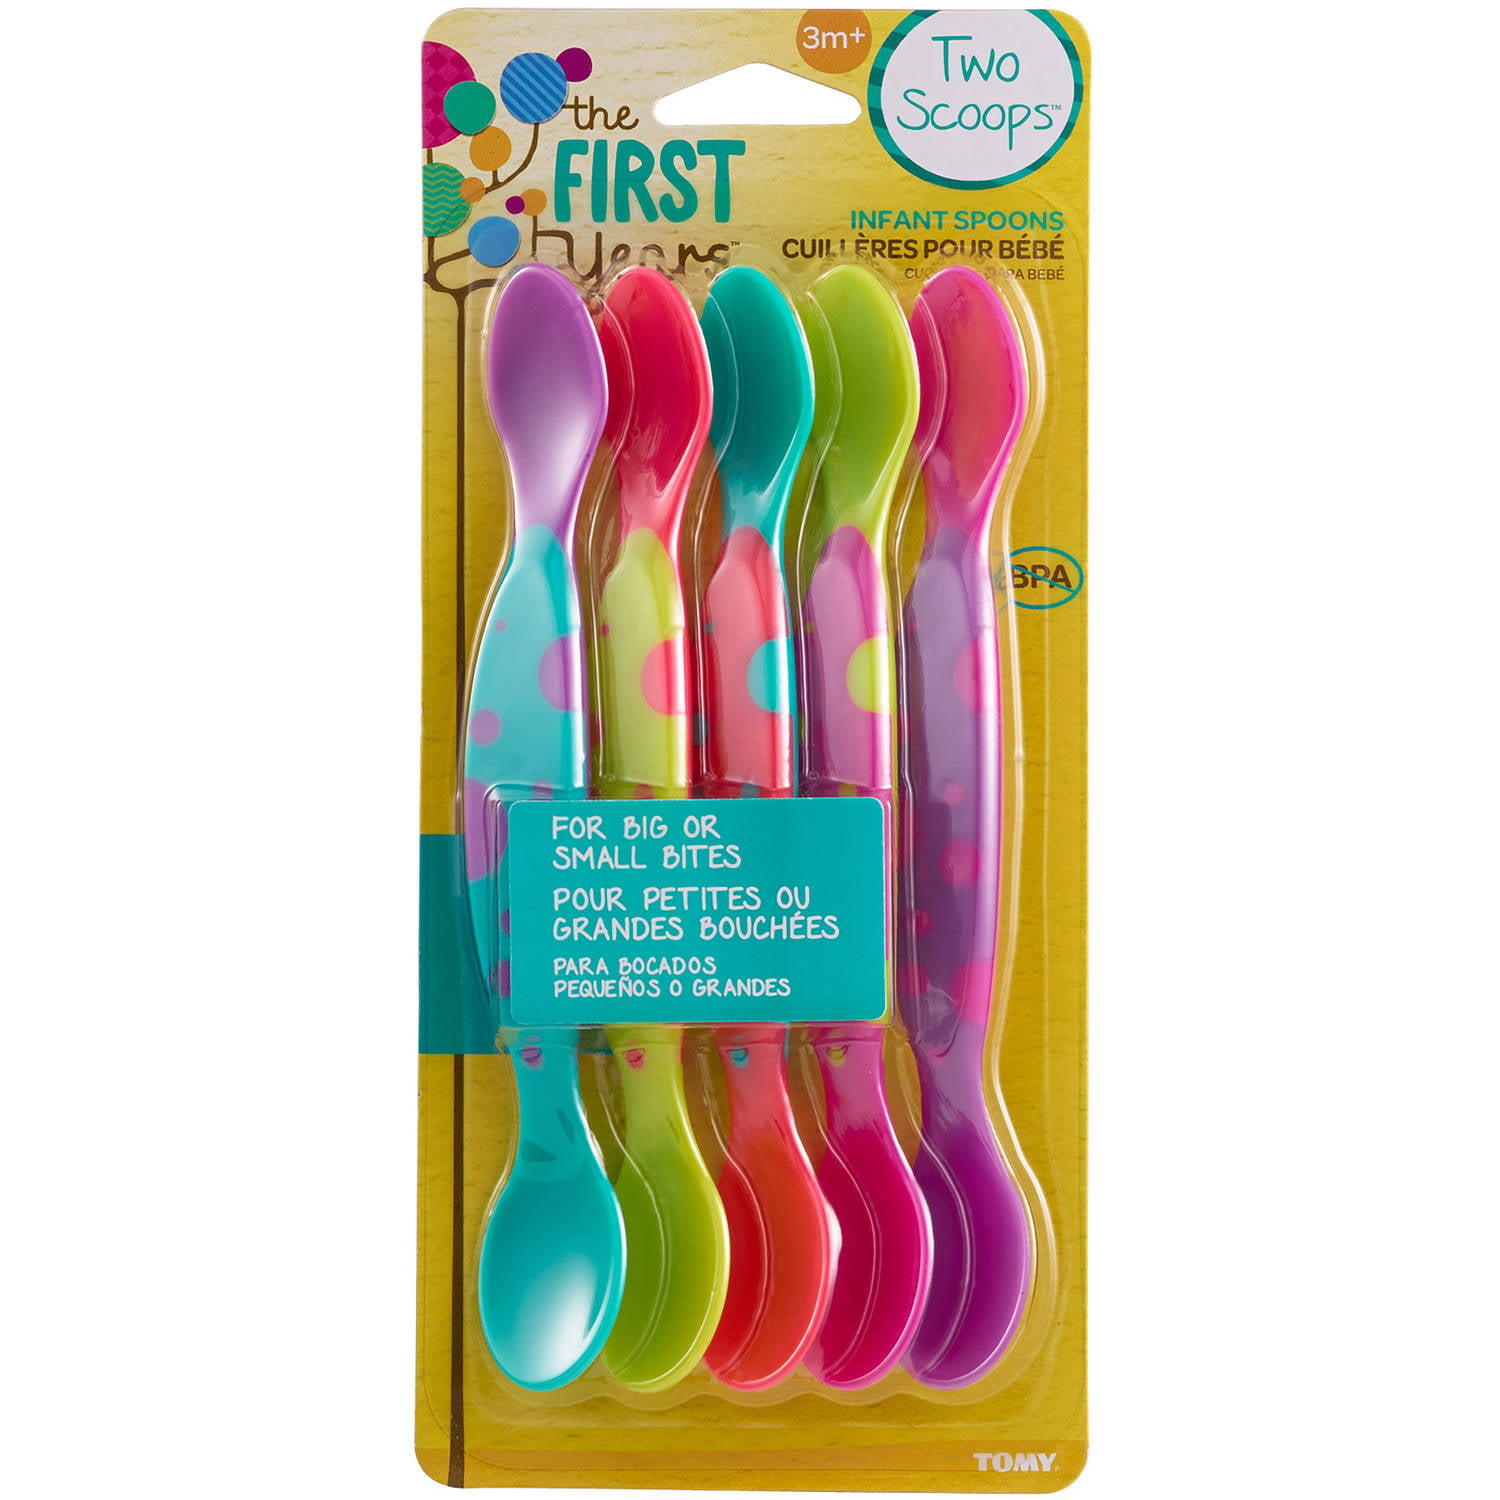 The First Years Two Scoops Infant Spoons, BPA-Free - 5 pack ...